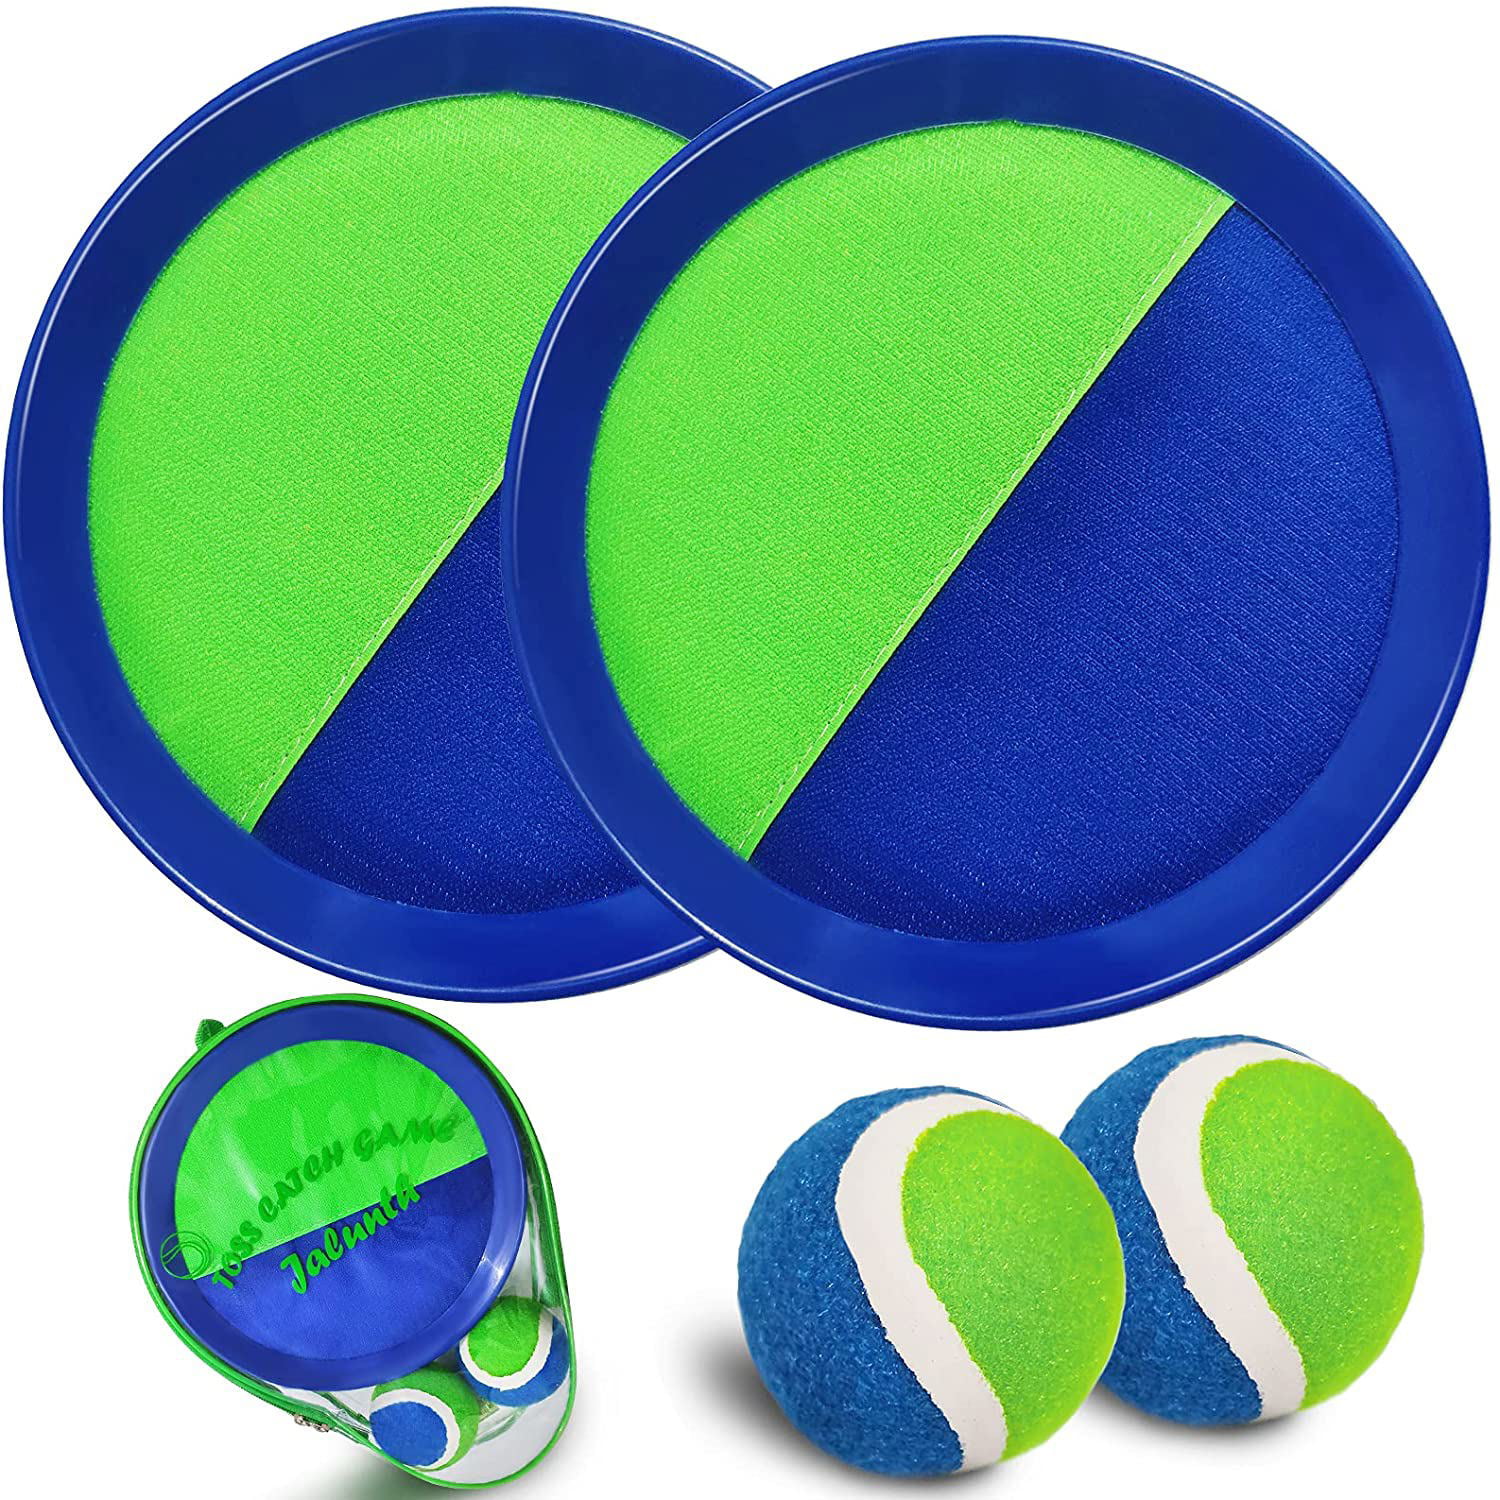 2 Paddles 1 Ball Vekows Ball Catch Set Games Toss Paddle Beach Toys Back Yard Outdoor Lawn Backyard Throw Sticky Set Age 3 4 5 6 7 8 9 10 11 12 Years Old Boys Girls Kids Adults Family Outside 